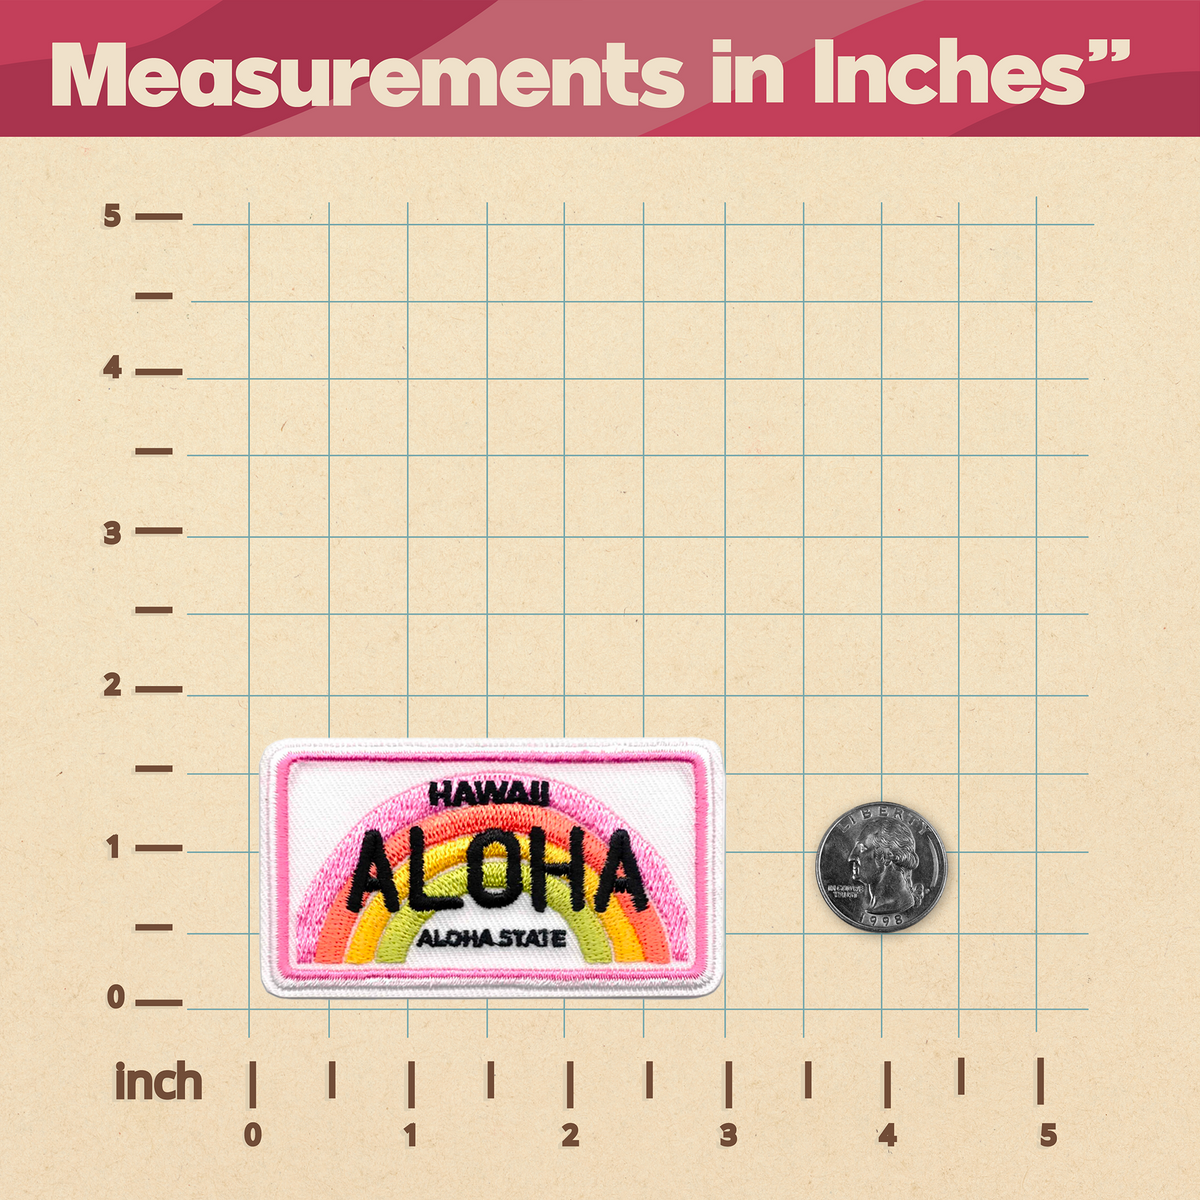 KosmicSoul Aloha Hawaii Plate Patch - measurements in inches.